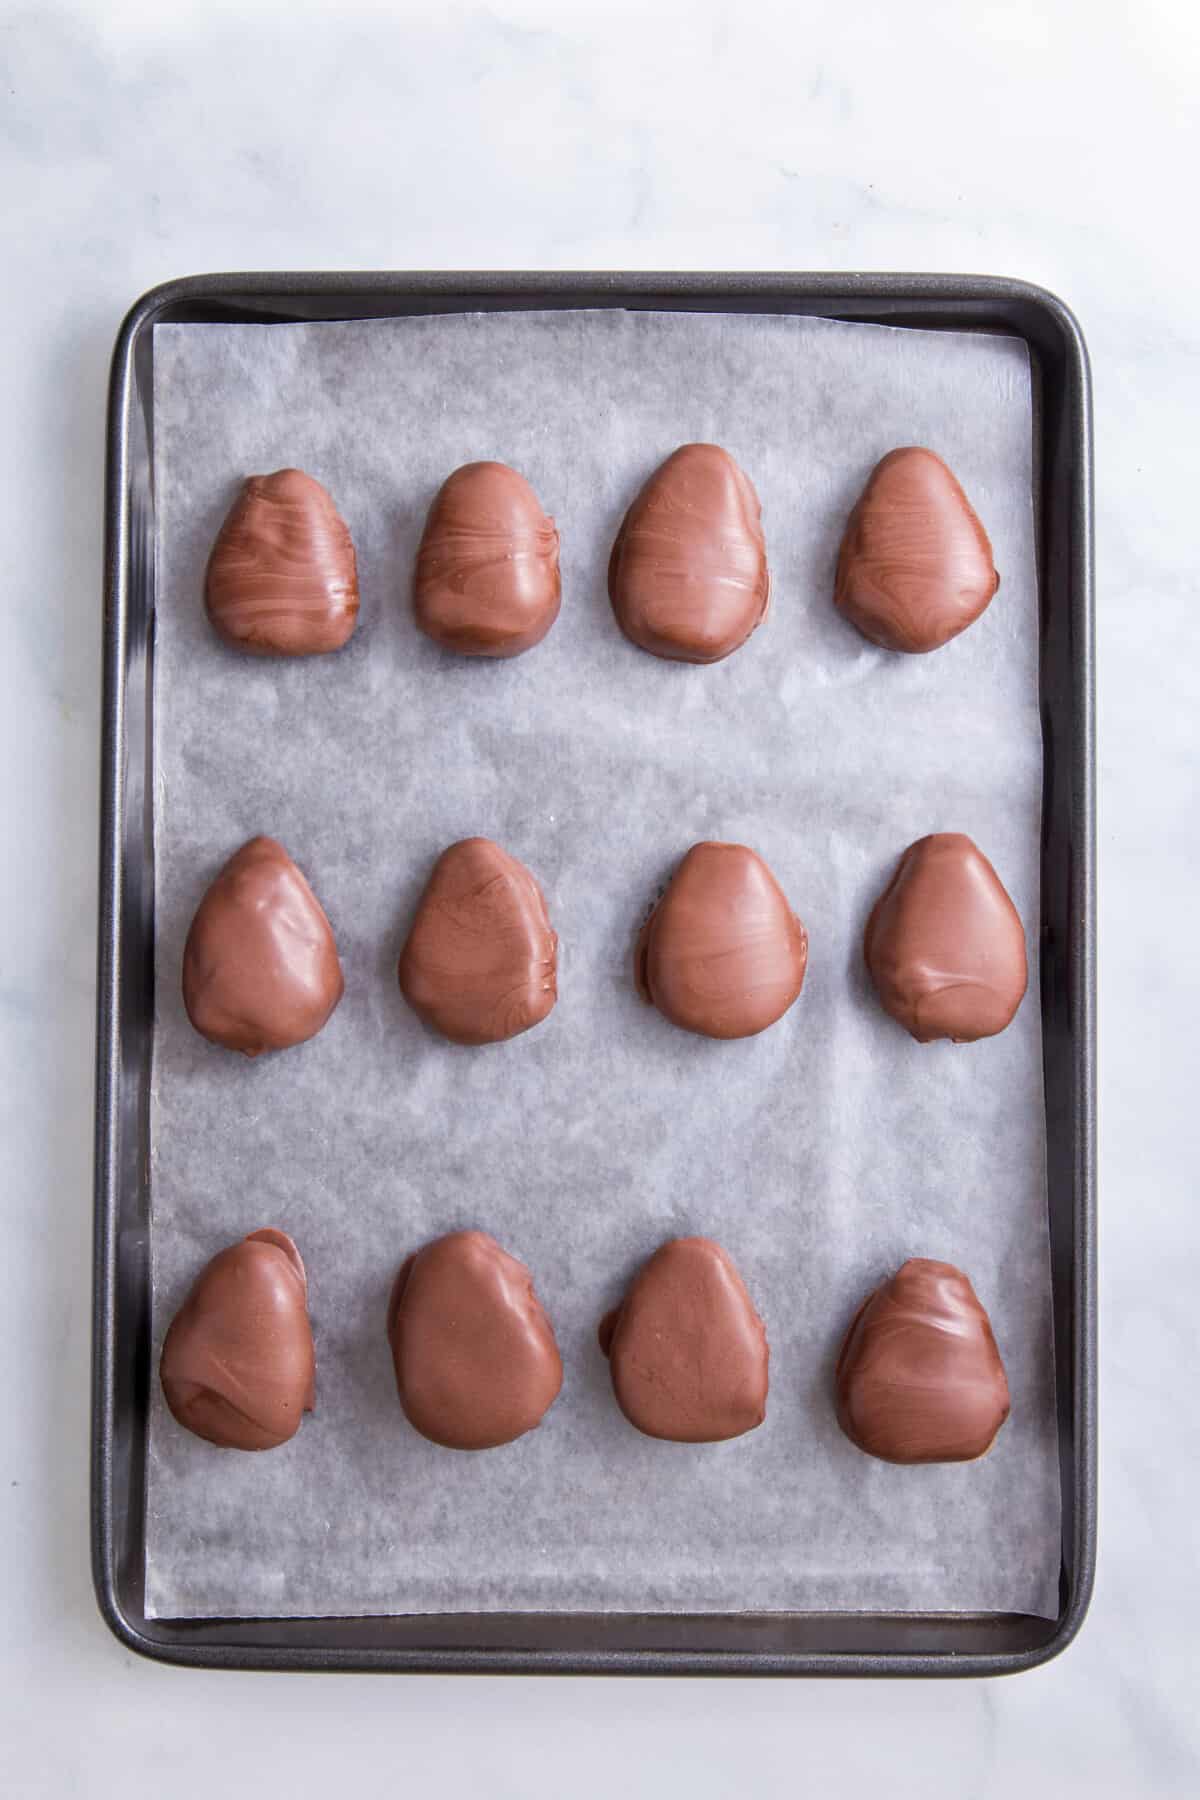 12 chocolate covered peanut butter eggs lined on a baking tray.